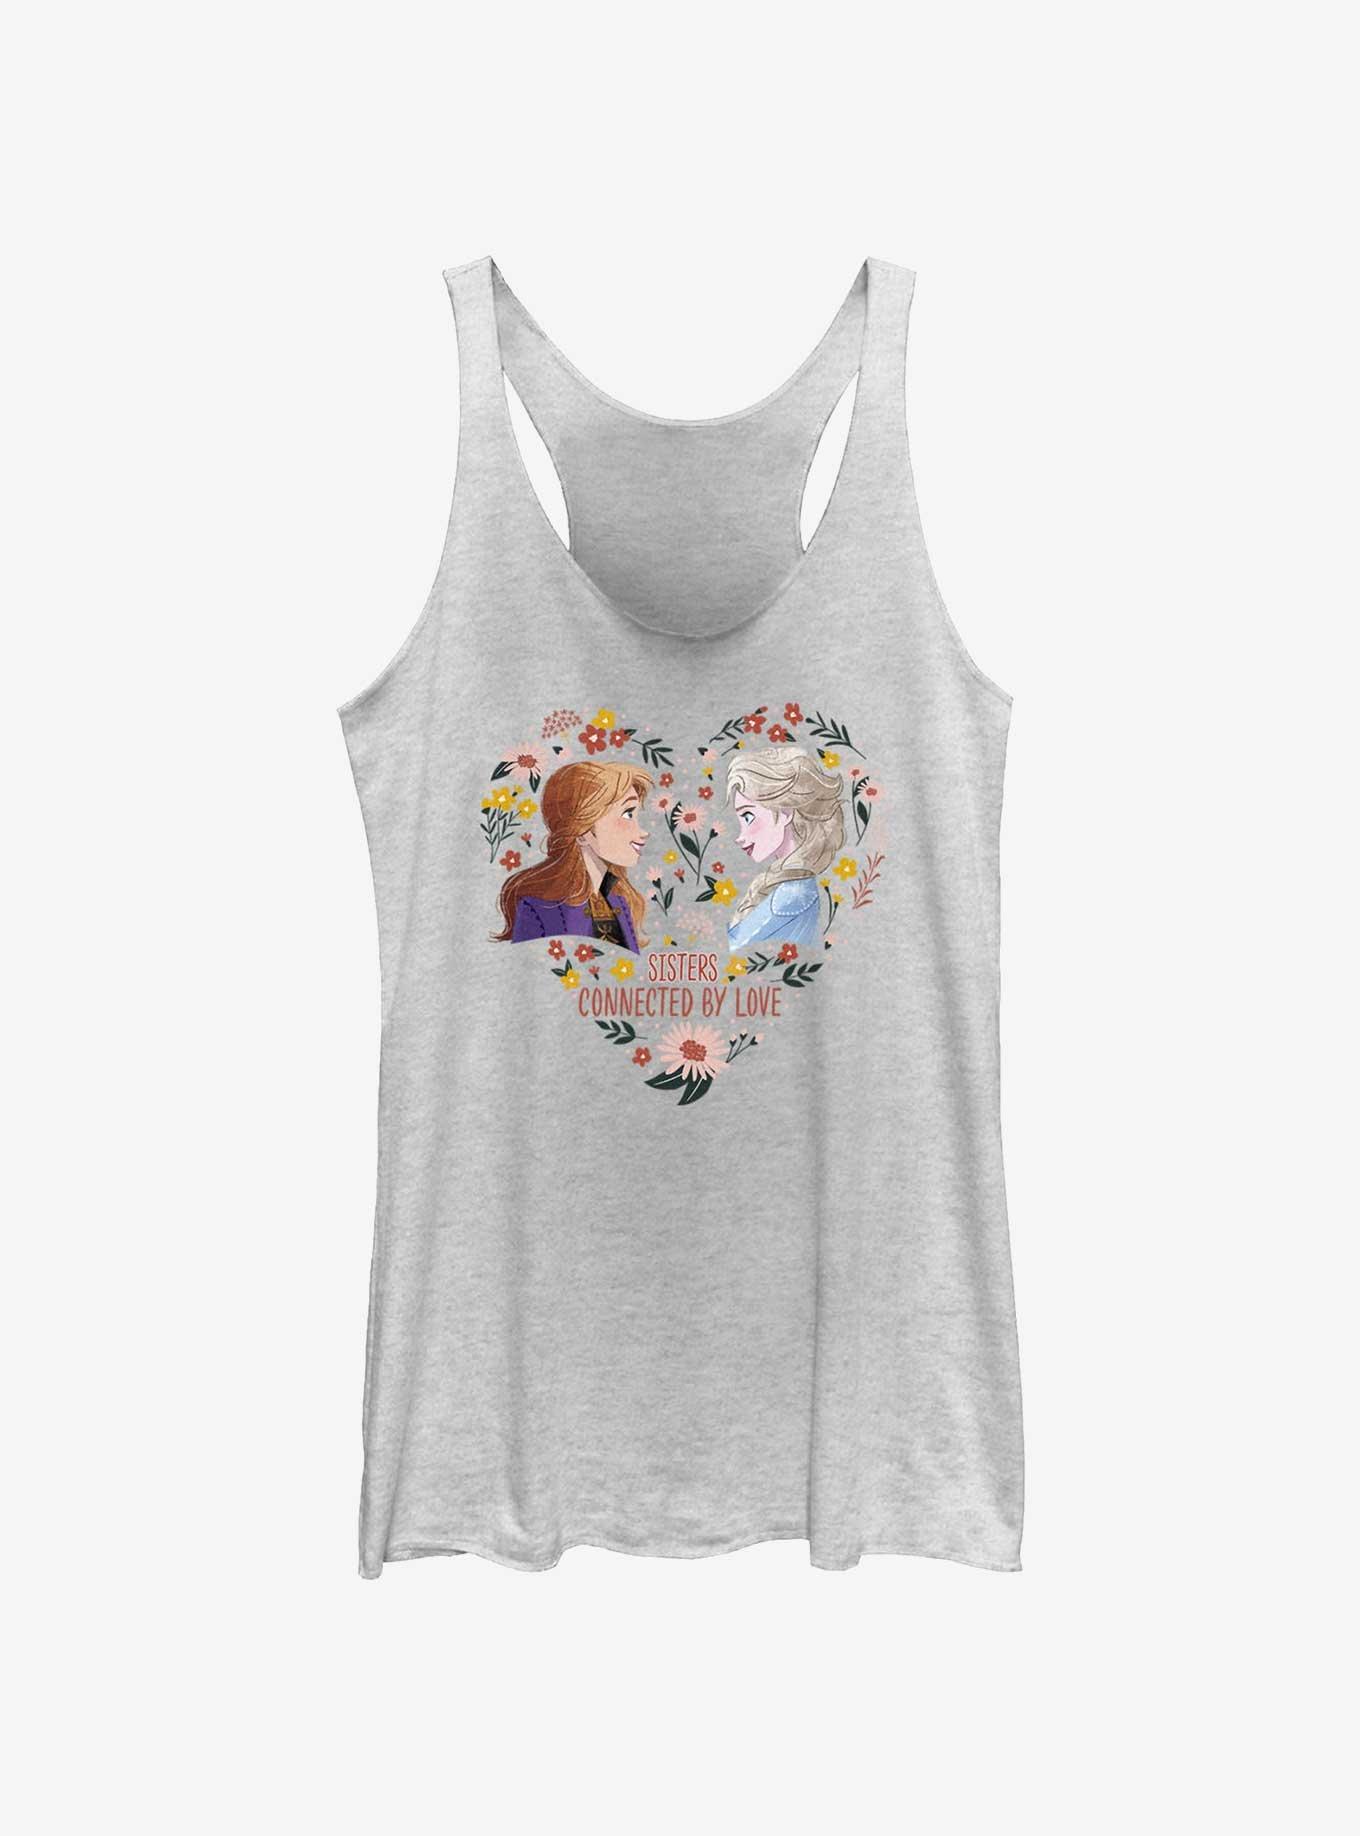 Disney Frozen Anna & Elsa Sisters Connected By Love Girls Tank, WHITE HTR, hi-res